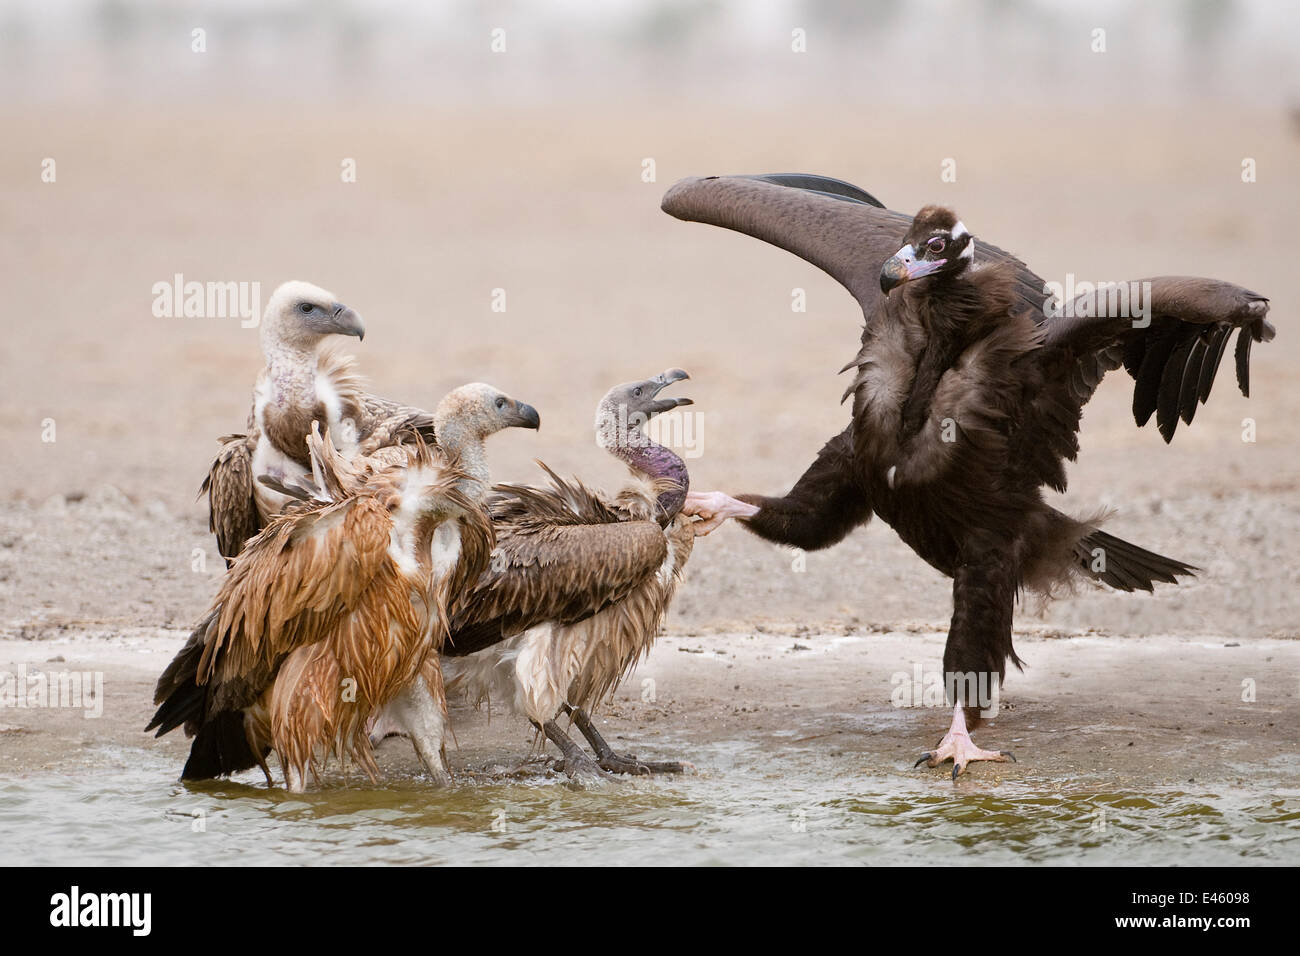 Cinereous / European Black Vulture (Aegypius monachus) in dispute with an Eurasian Griffon Vulture (Gyps fulvus), alongside a Himalayan Griffon (Gyps himalayensis) and Long-billed Vulture (Gyps indicus) at edge of lake, Rajasthan, India Stock Photo